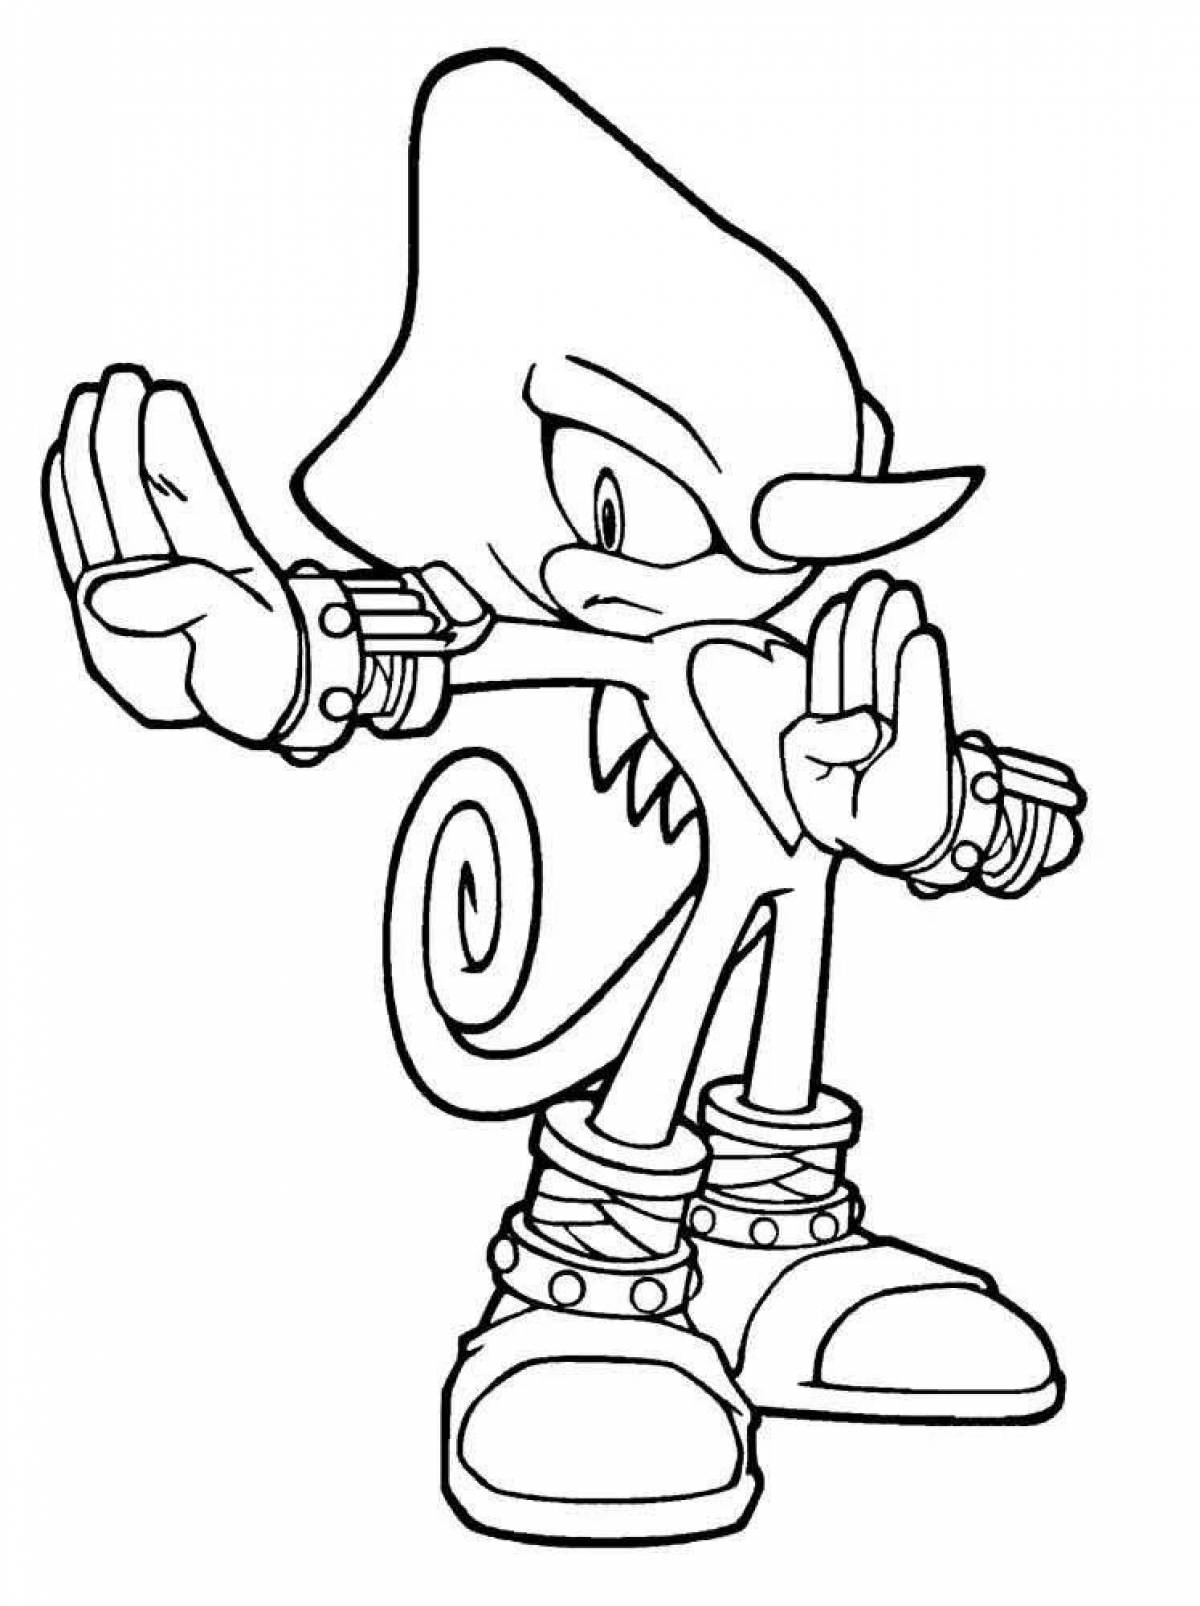 Great sonic heroes coloring book